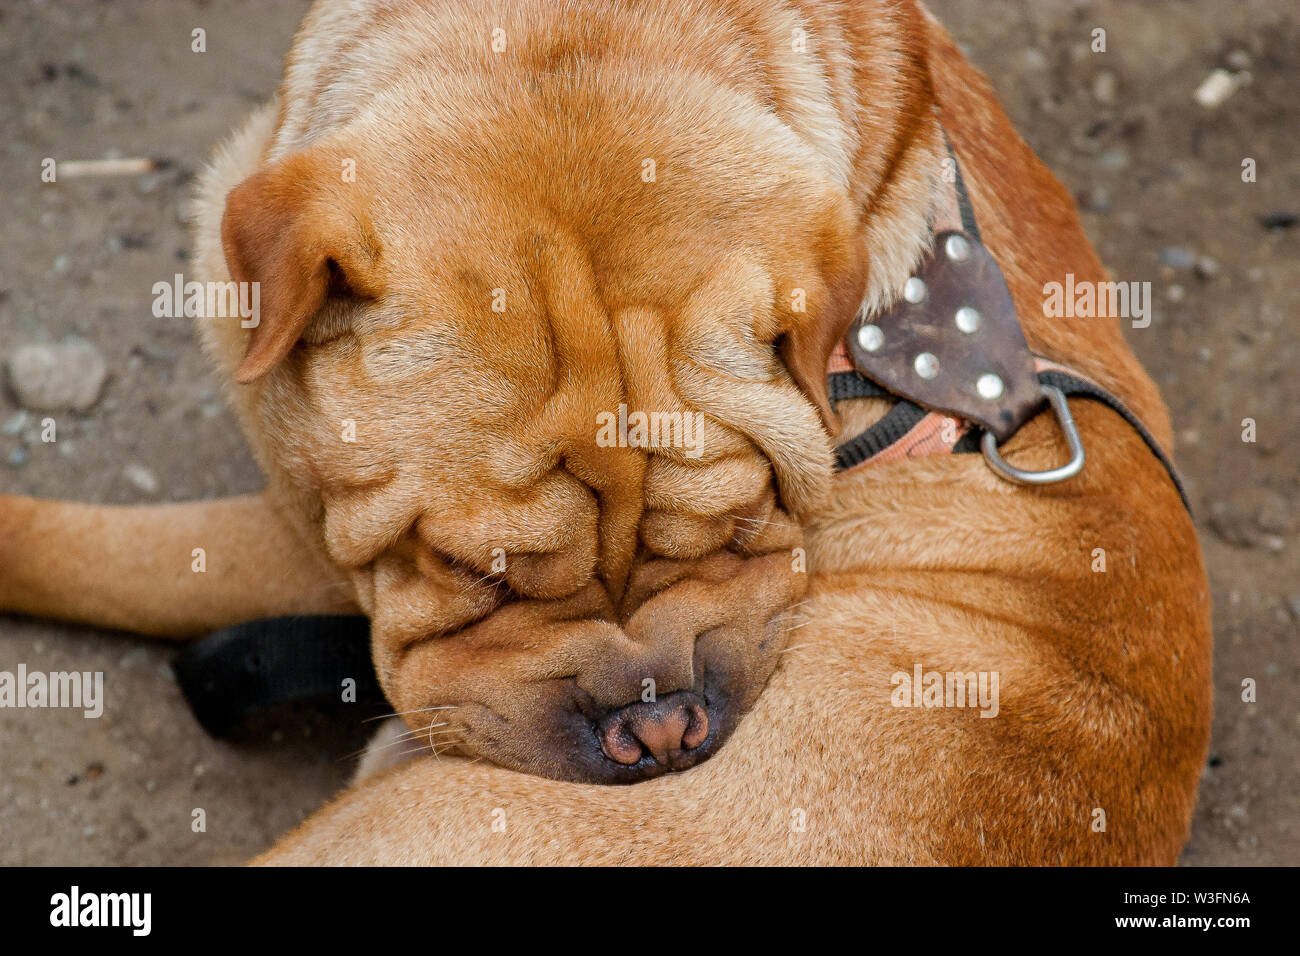 Cute wrinkly dog resting. Stock Photo